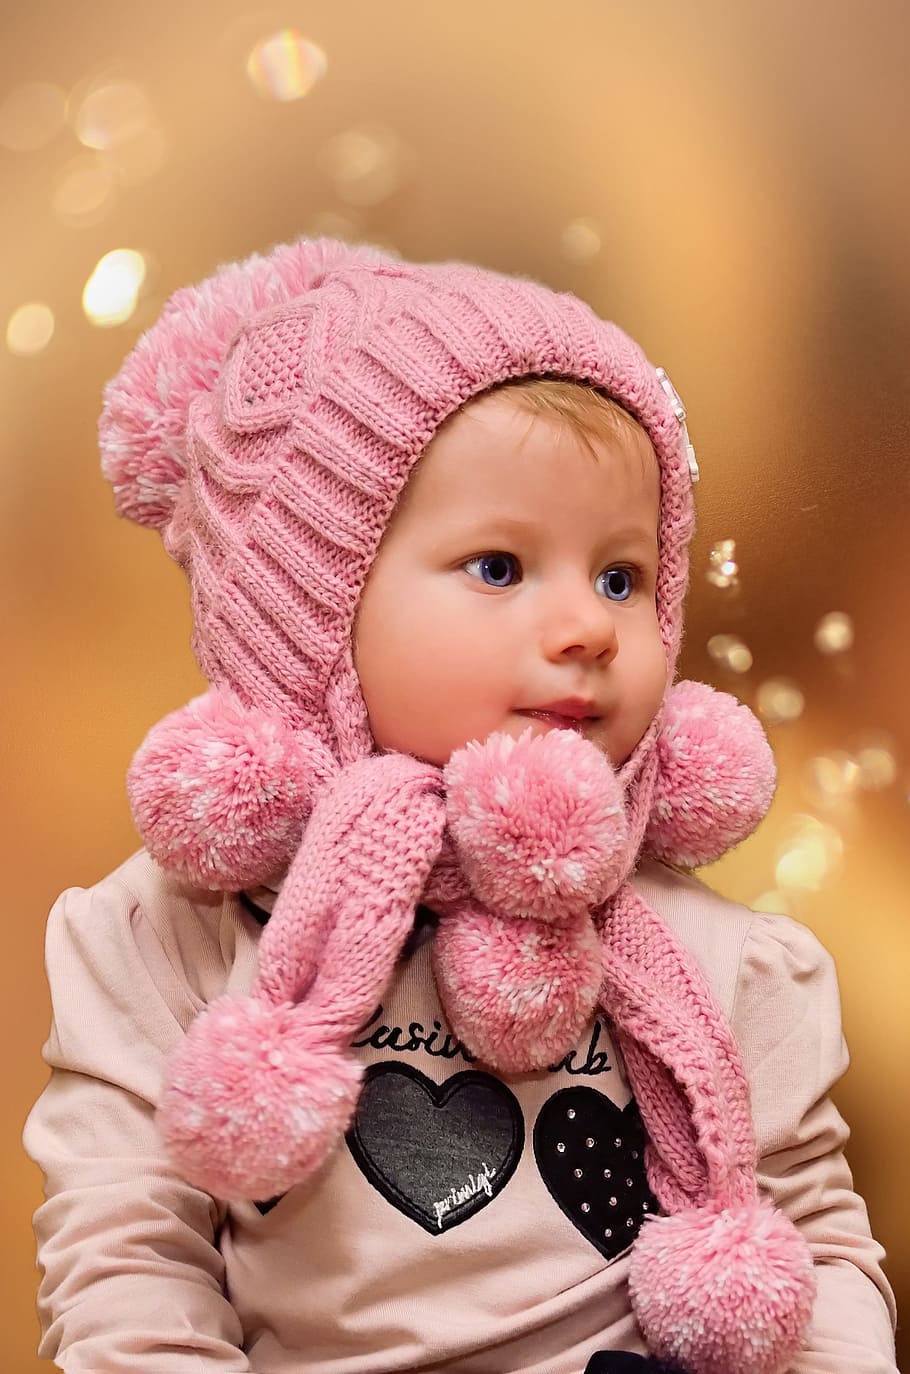 baby, little, cute, lovely, portrait, person, childhood, pink color, HD wallpaper